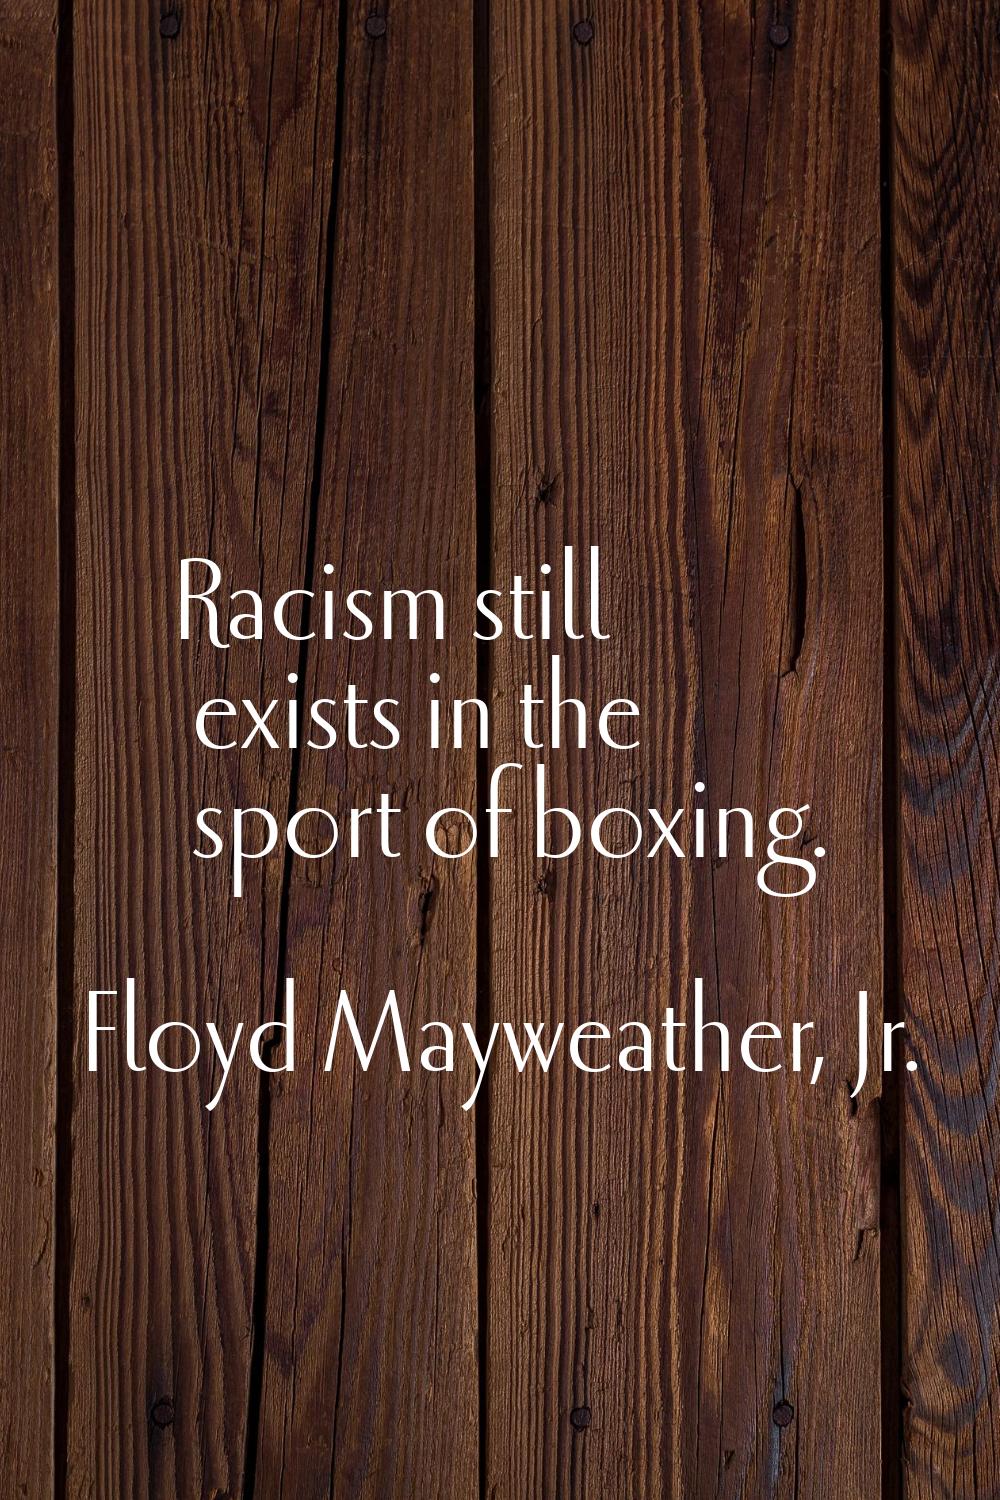 Racism still exists in the sport of boxing.